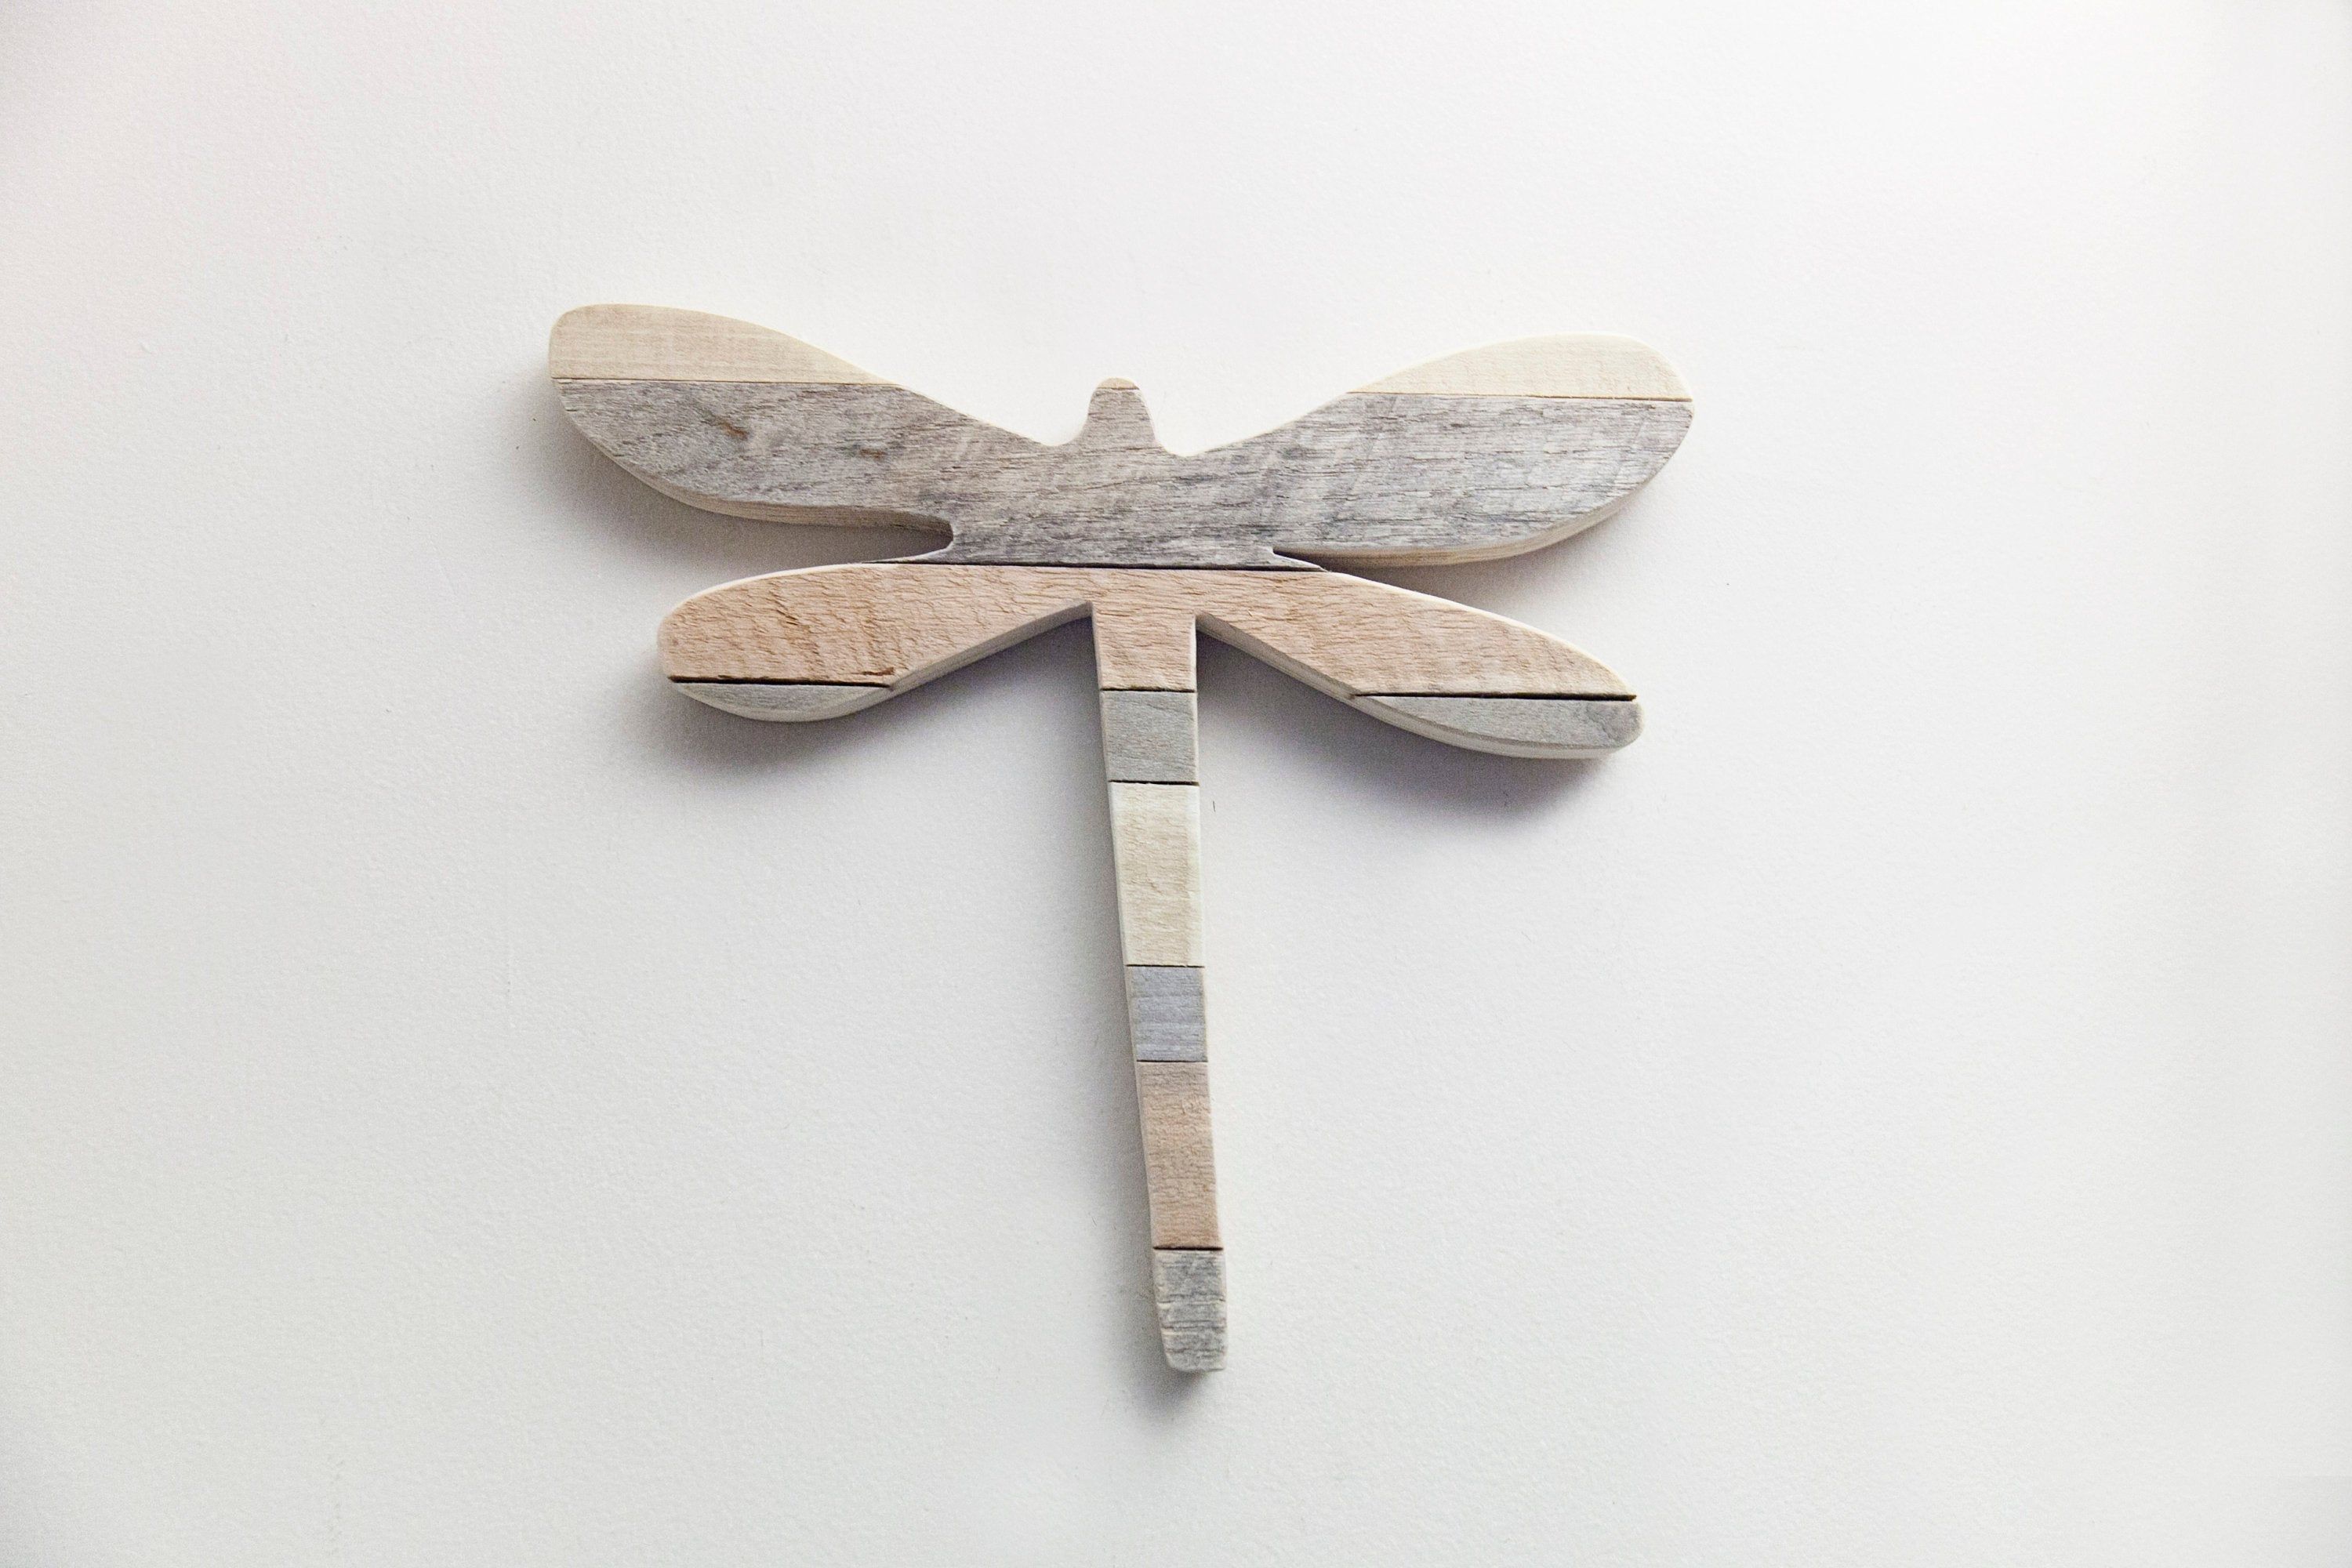 Dragonfly Wooden Wall Decor, Dragonfly Wall Art, Dragonfly Gift, Unique  Dragonfly, Dragonfly Sign, Wood Dragonfly Decor, Rustic Home Decor With Regard To Dragonfly Wall Decor (View 11 of 30)